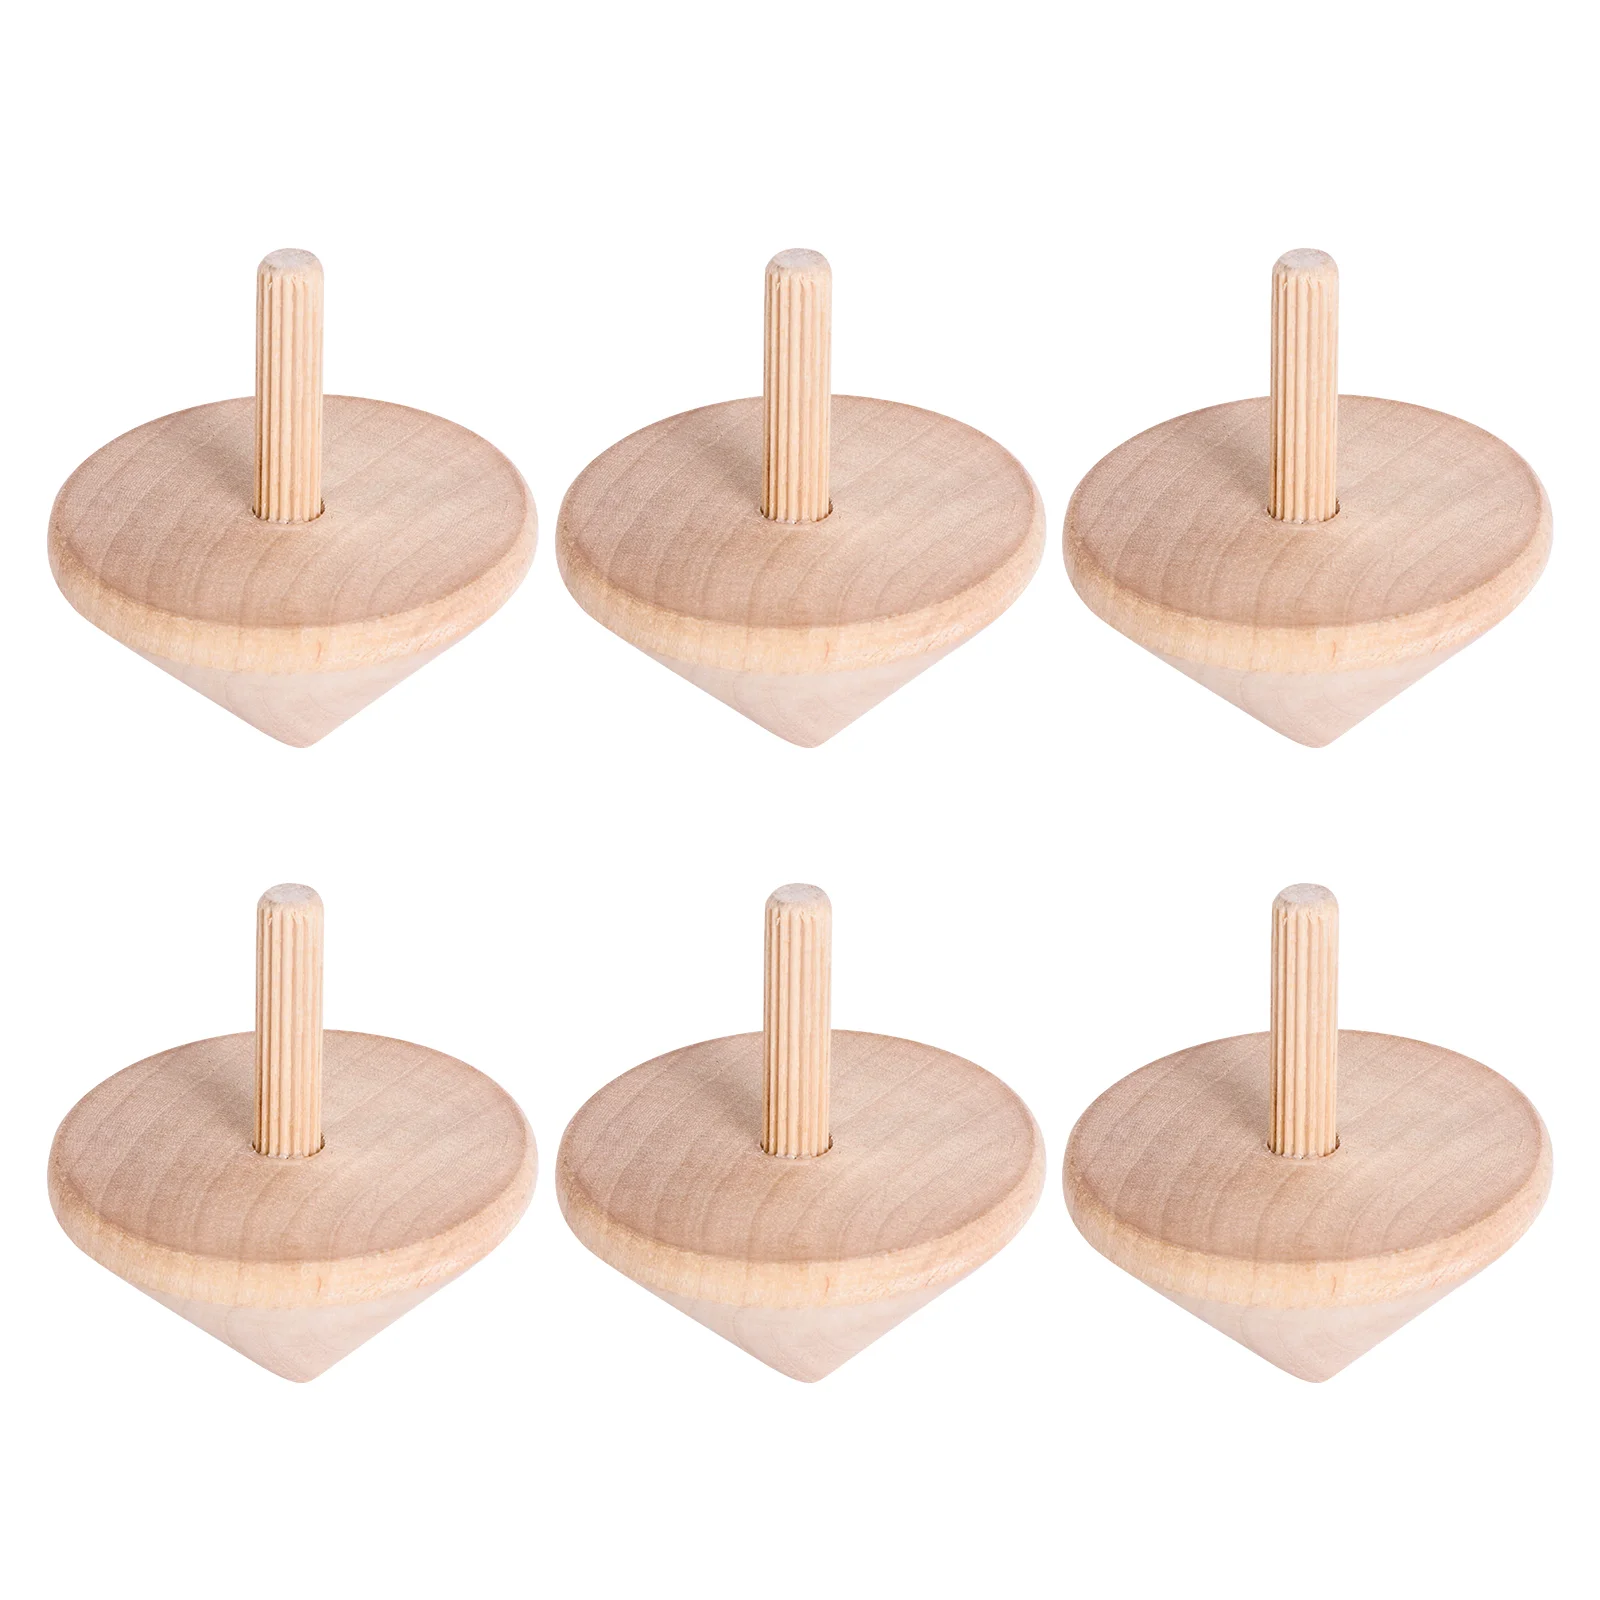 6pcs Wooden Rotate Spinning Tops Classical Funny Peg-Top Gyro Toys Relief Stress Desktop Toys For Children Kids Gift